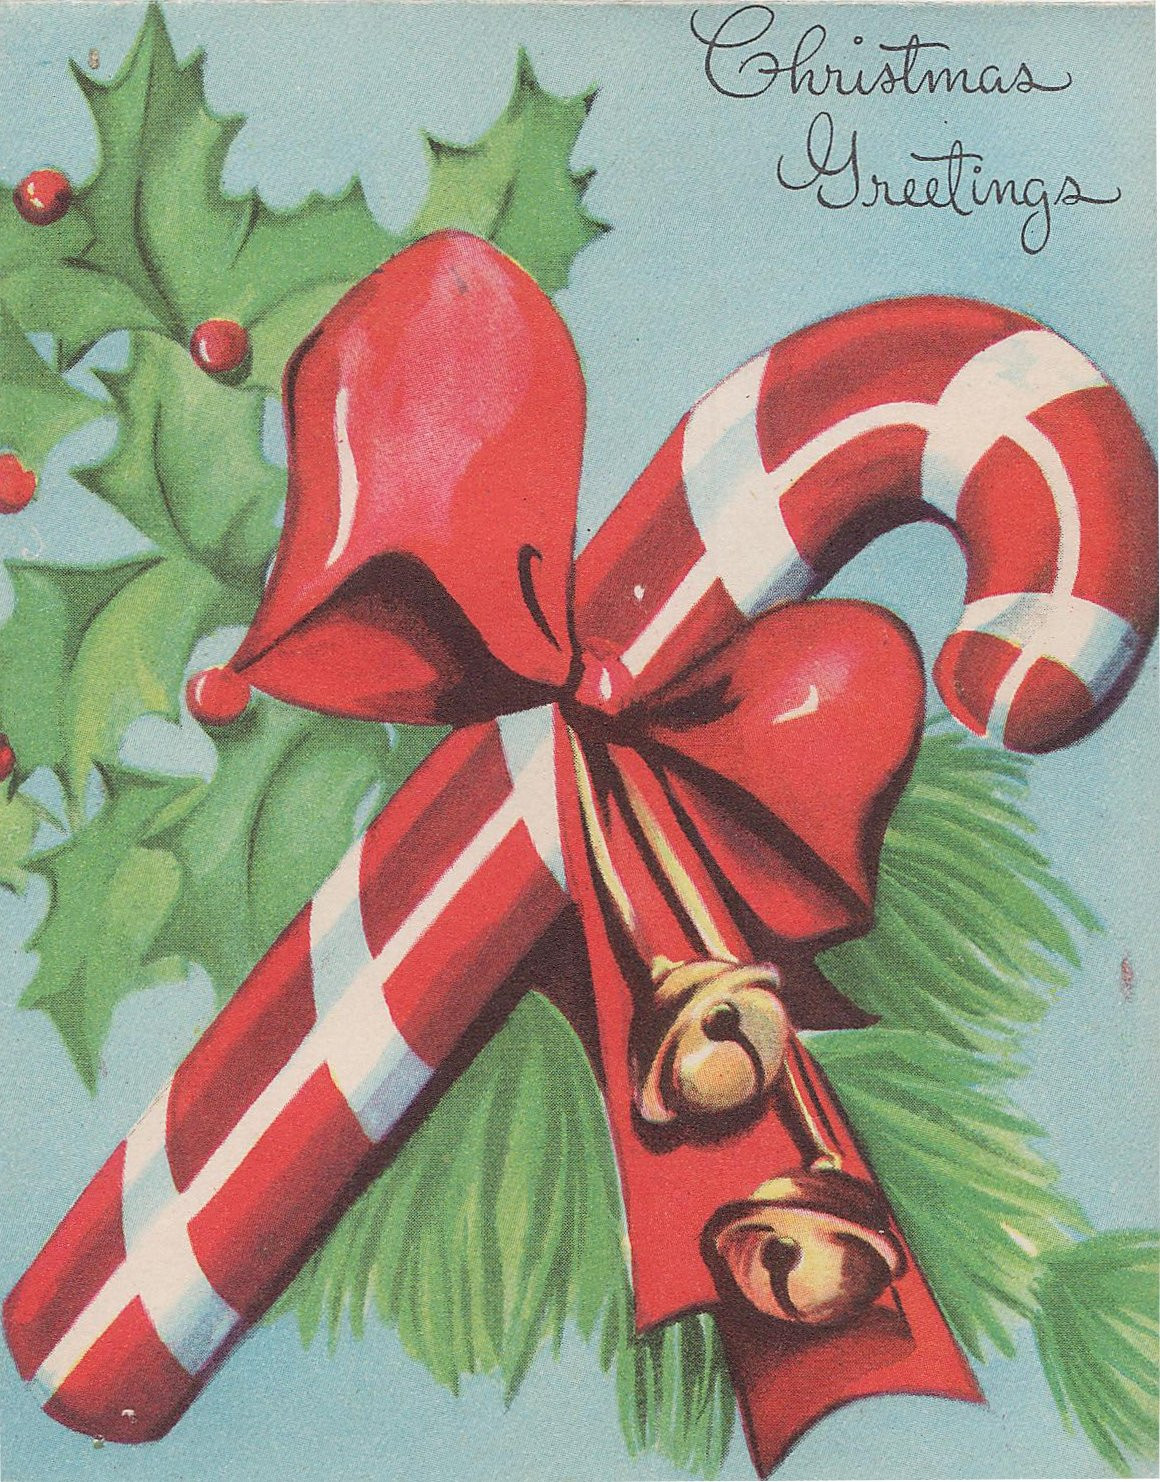 Candy Cane Christmas Cards
 Candy Cane Vintage Christmas Card